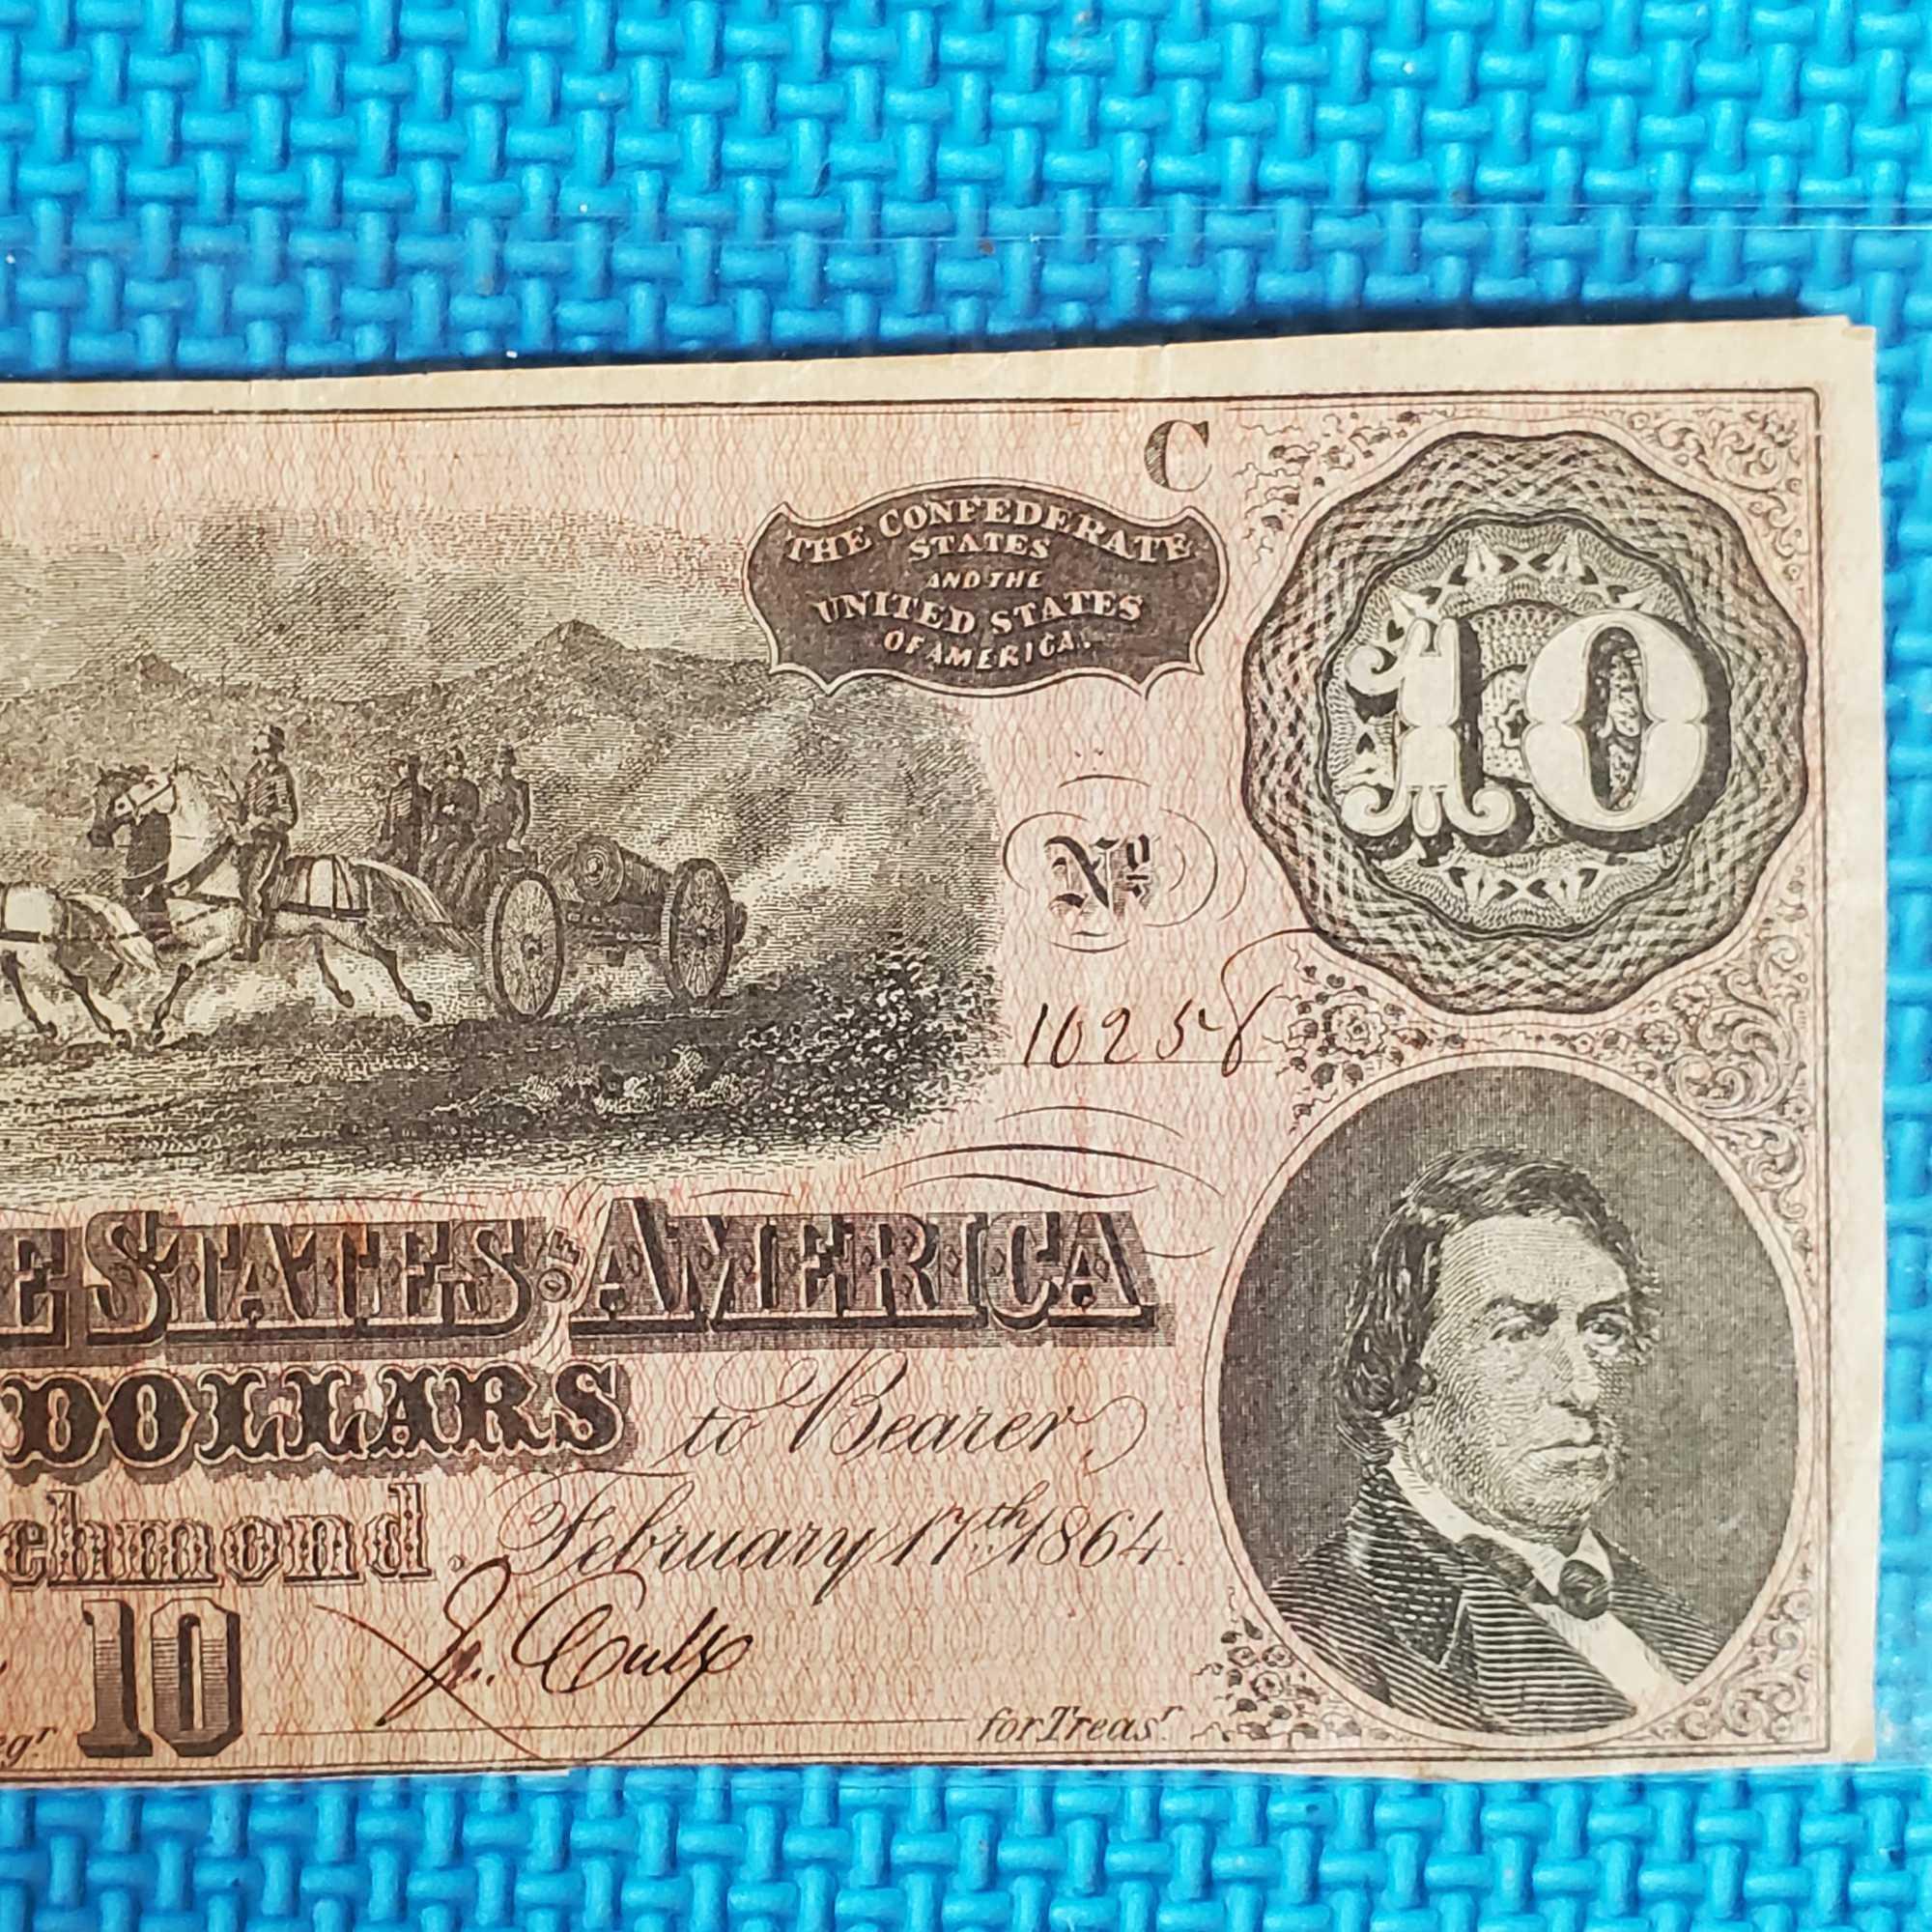 3 Confederate States of America Ten Dollars Notes Richmond 1864